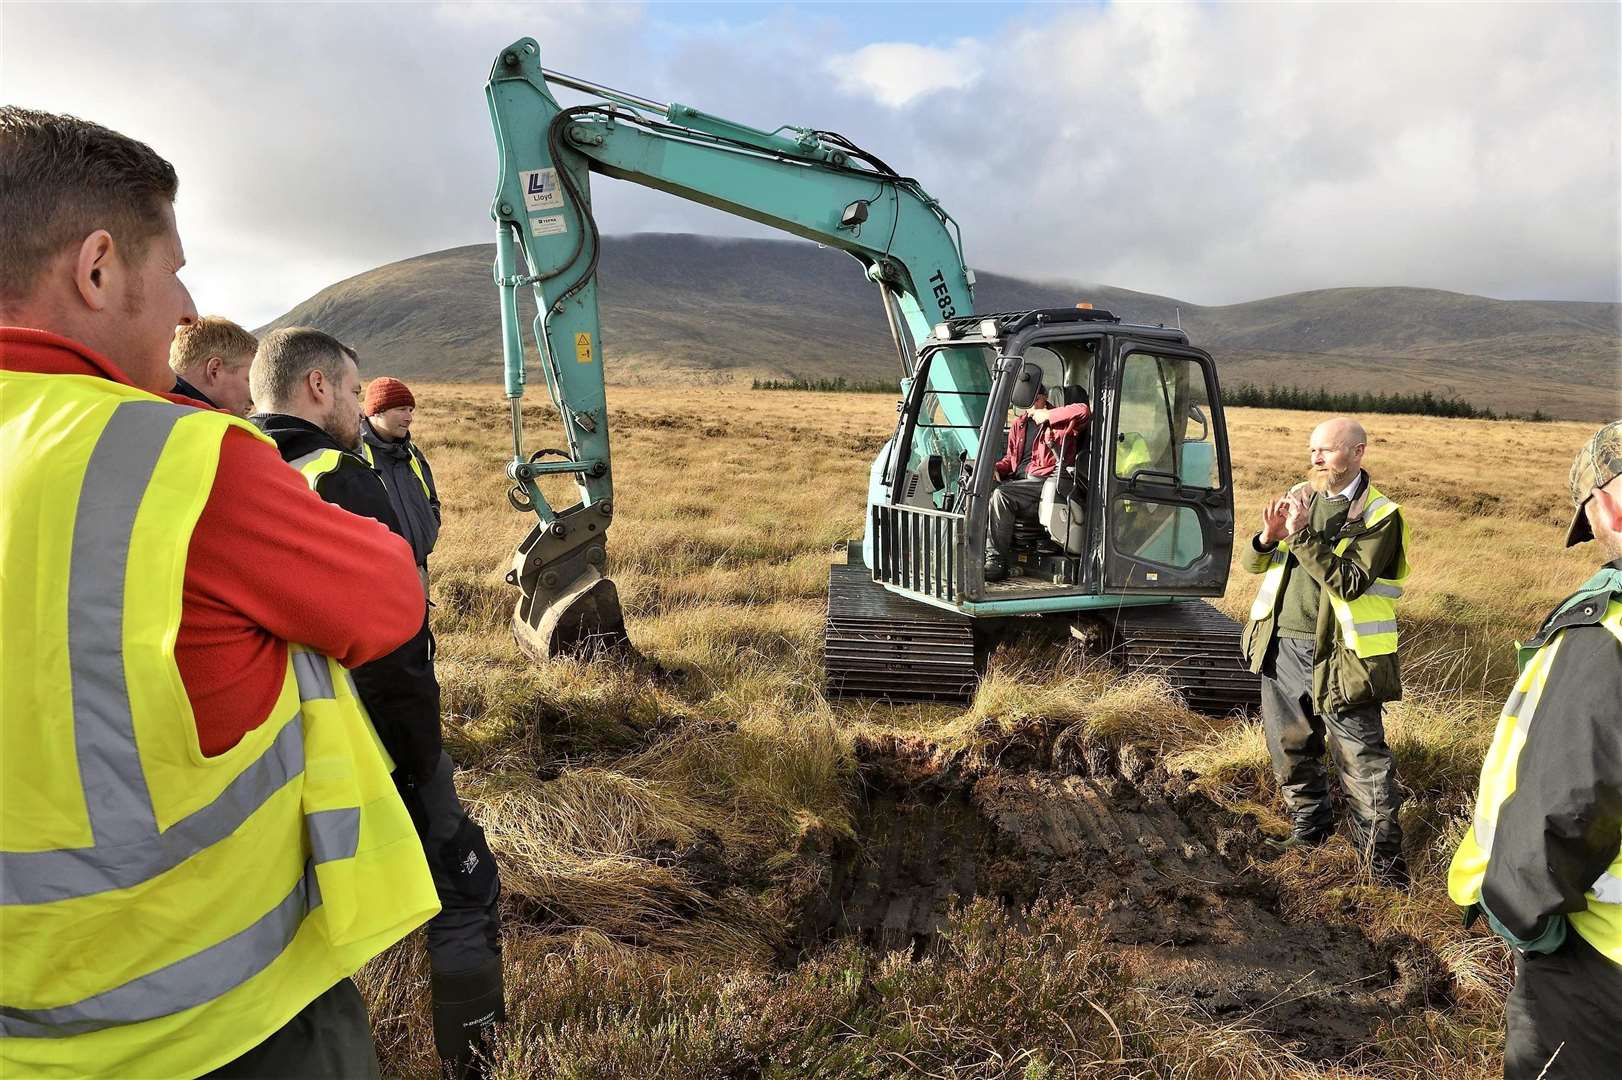 A Peatland ACTION demonstration day at Cairnsmore of Fleet National Nature Reserve, Dumfries and Galloway.